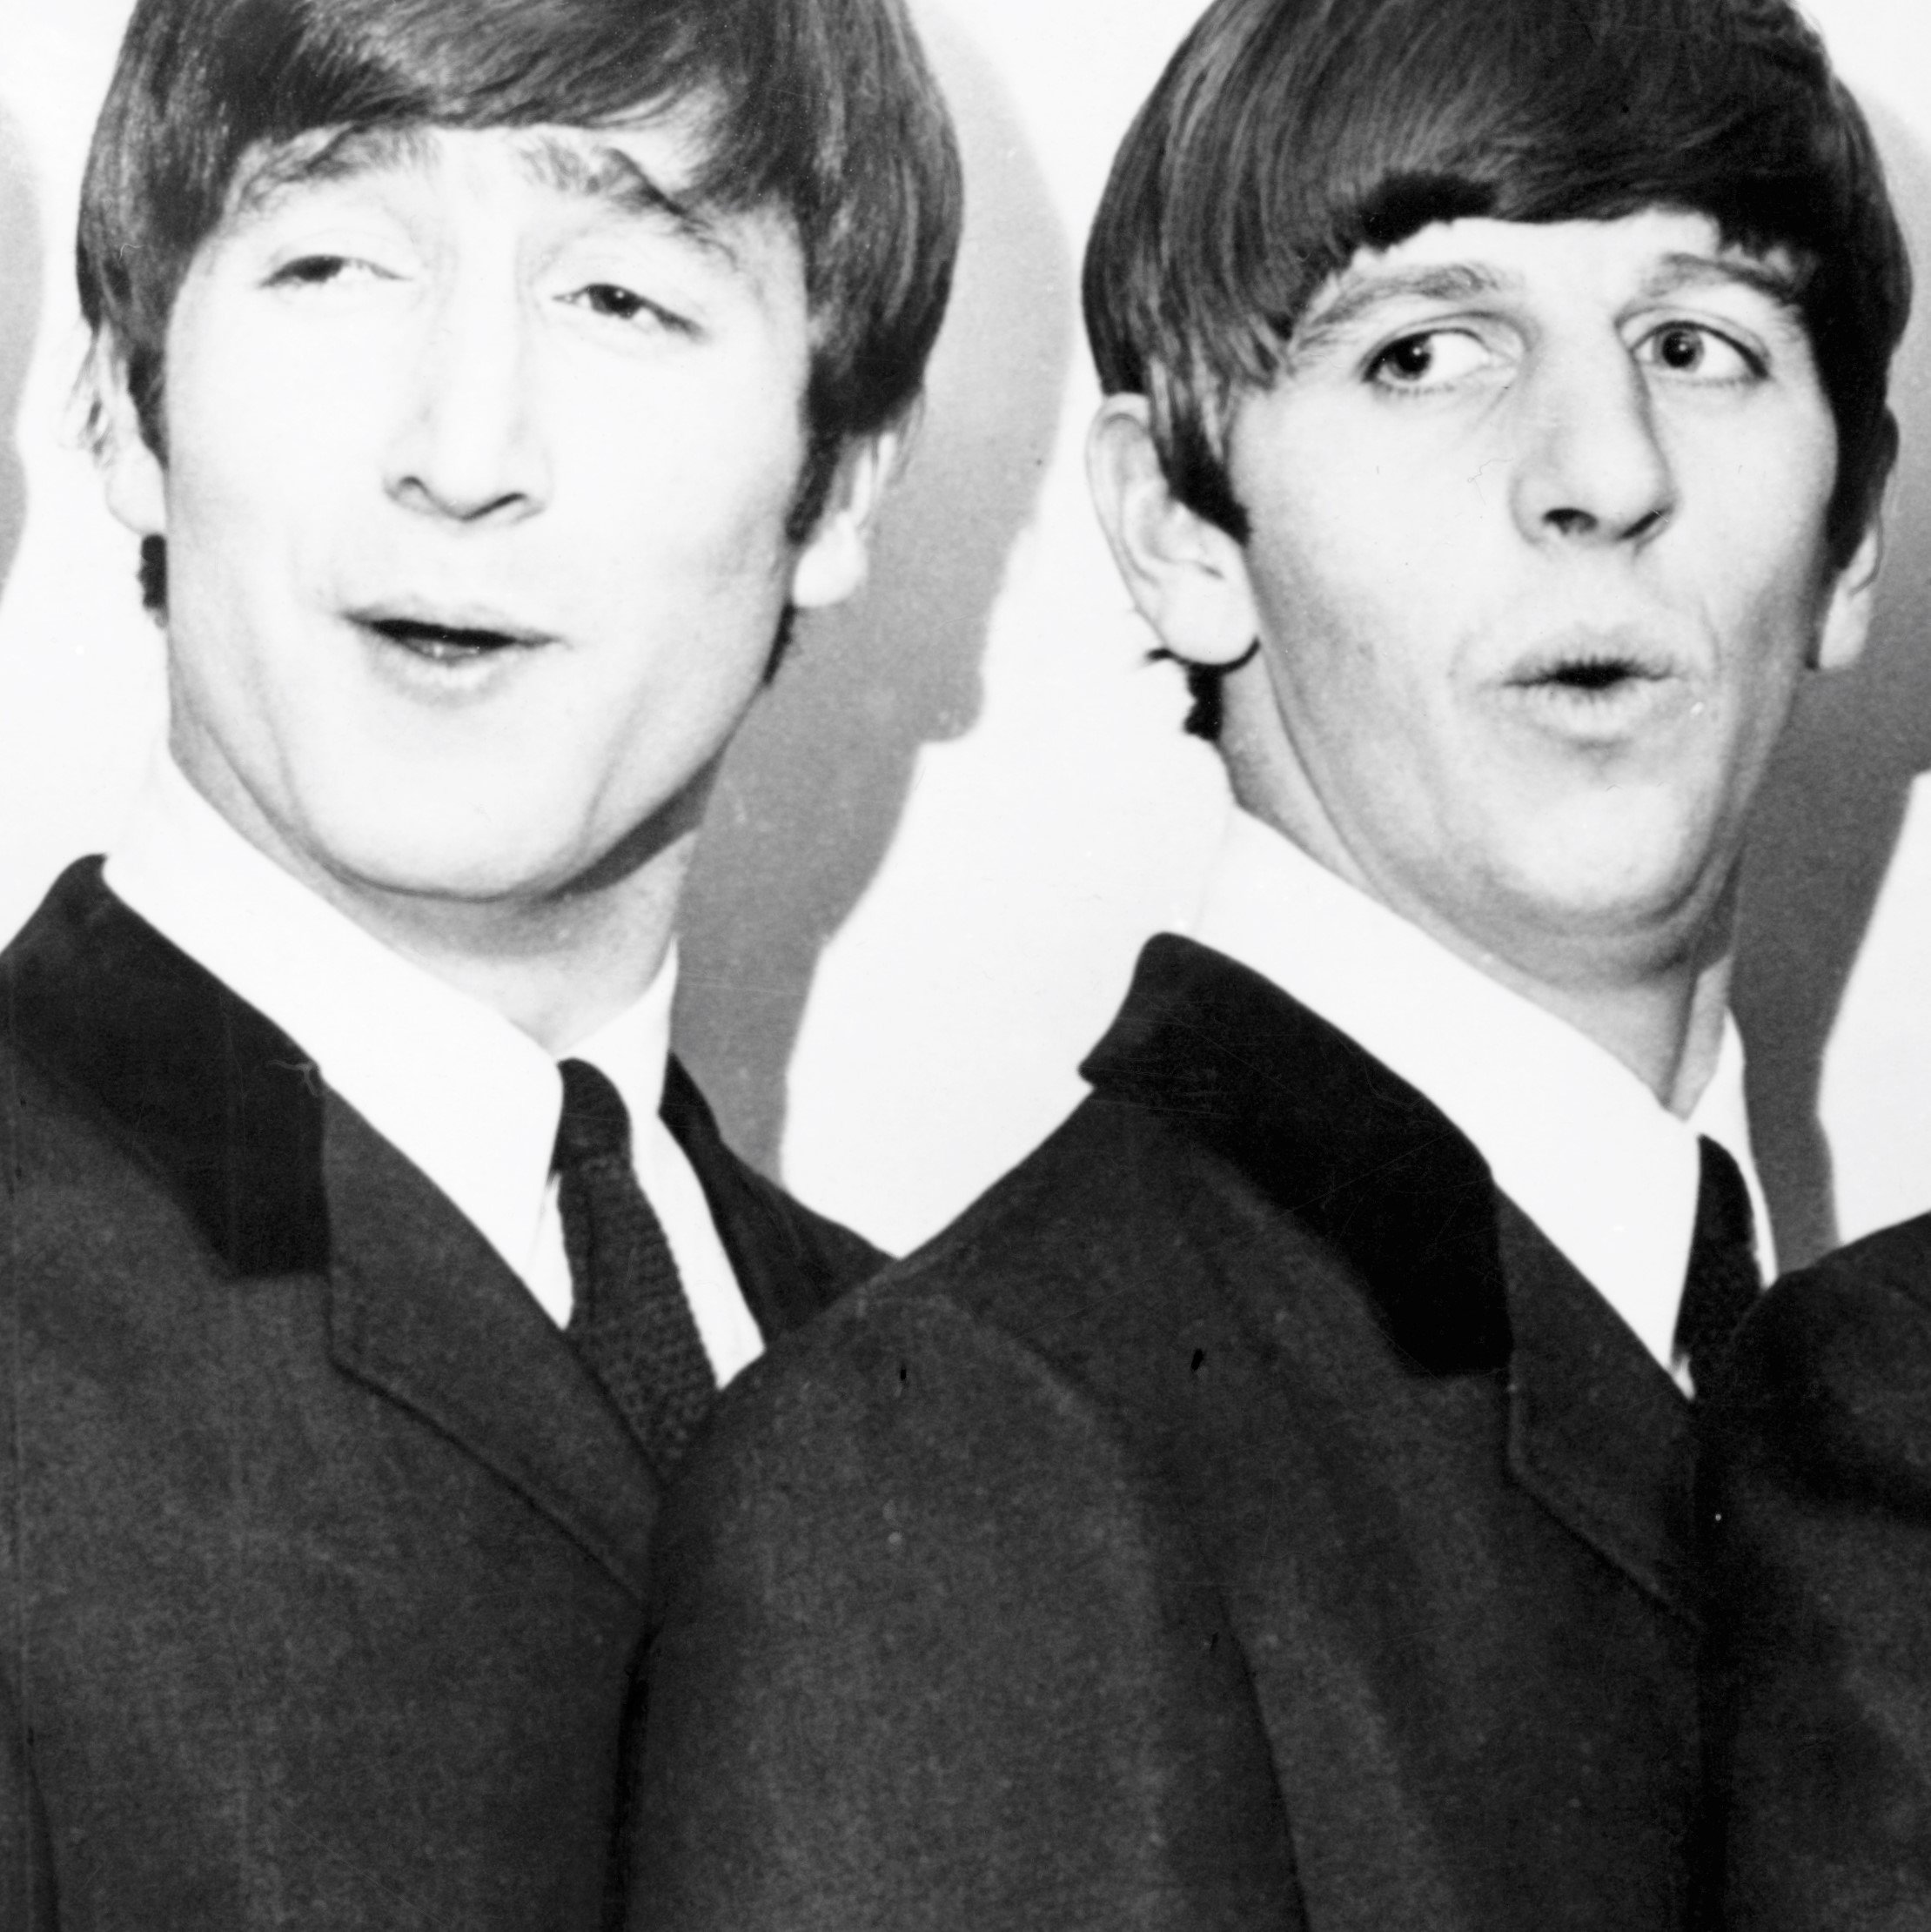 The Beatles' John Lennon and Ringo Starr wearing suits